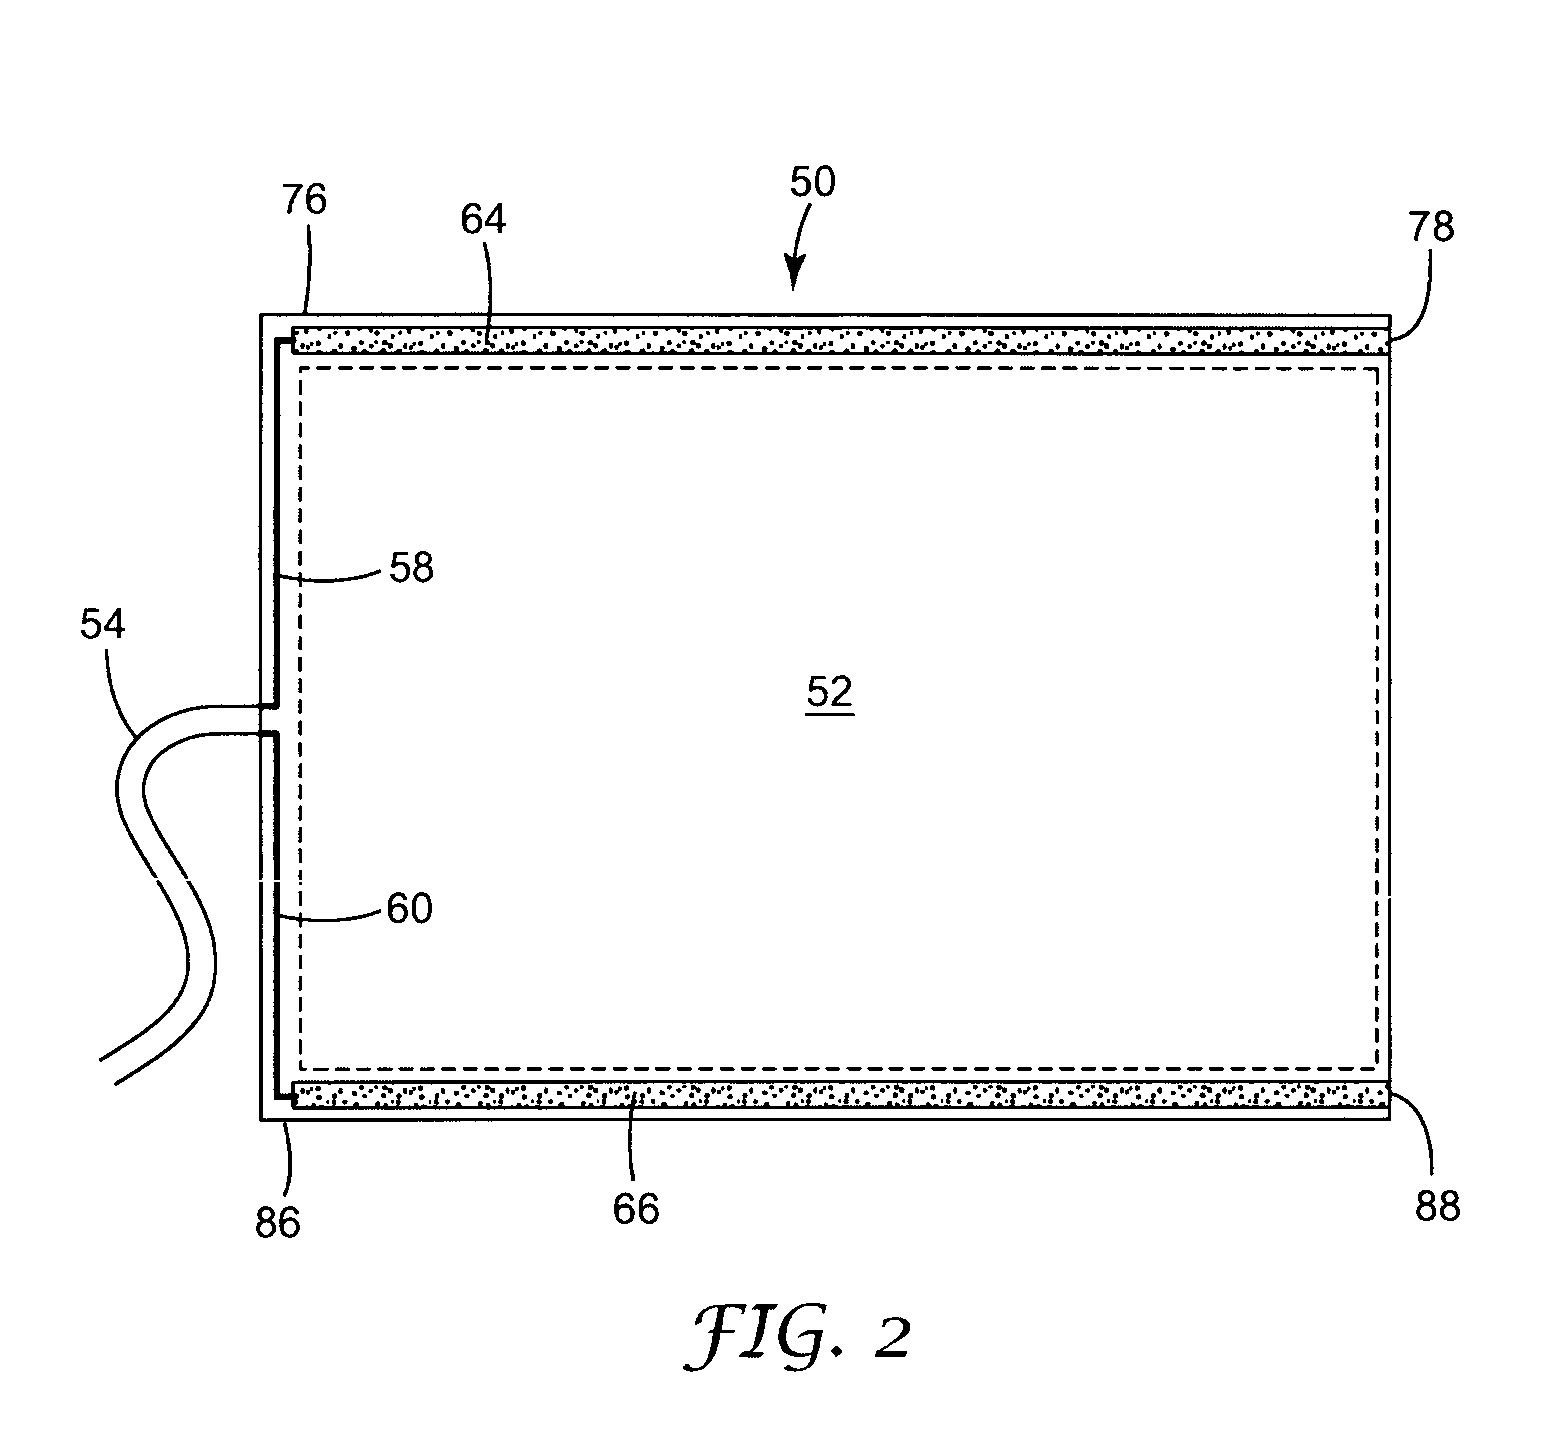 Resistive touch screen incorporating conductive polymer